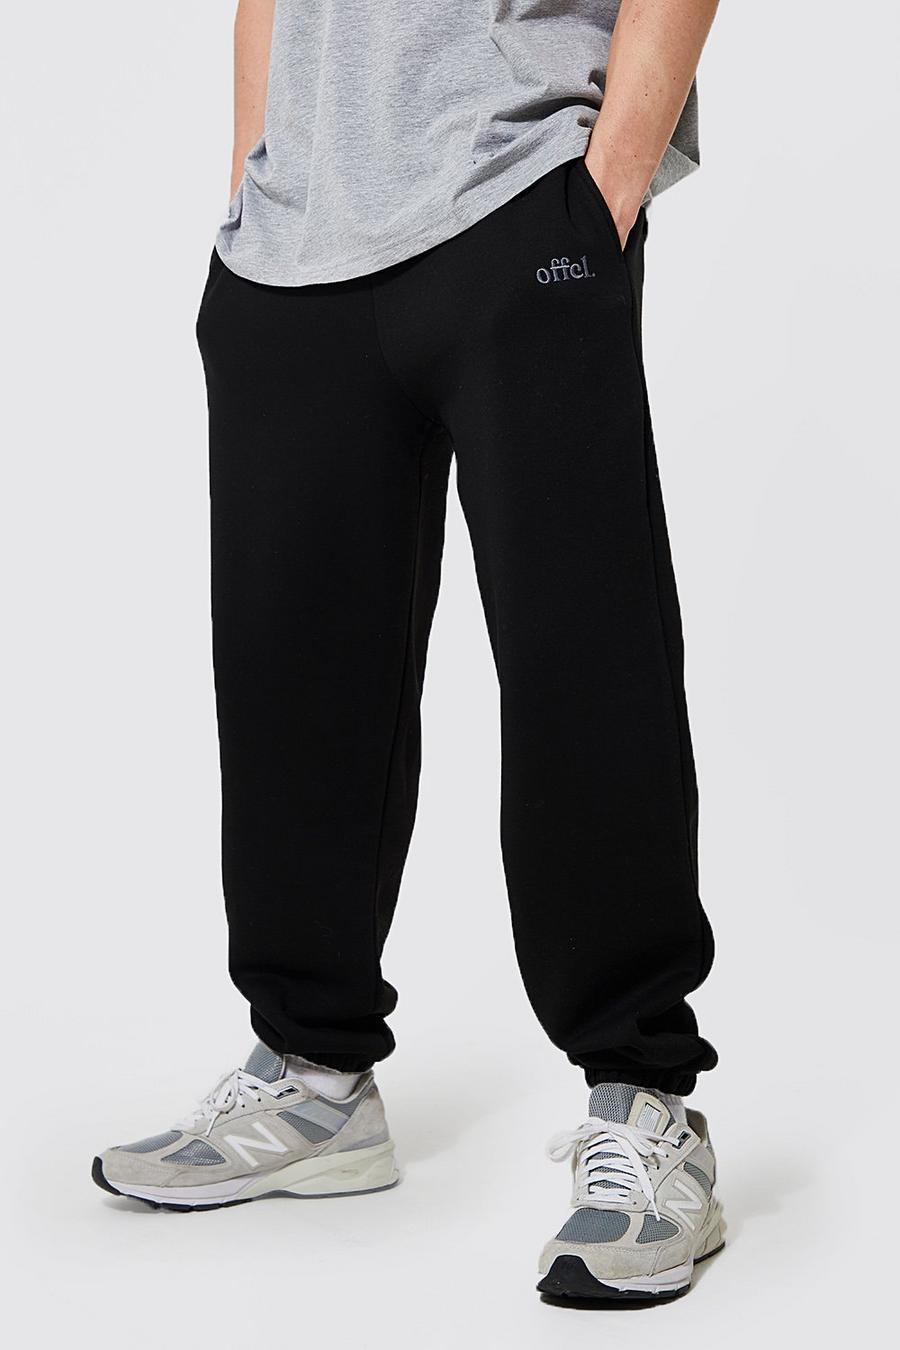 Black Offcl Loose Fit Jogger